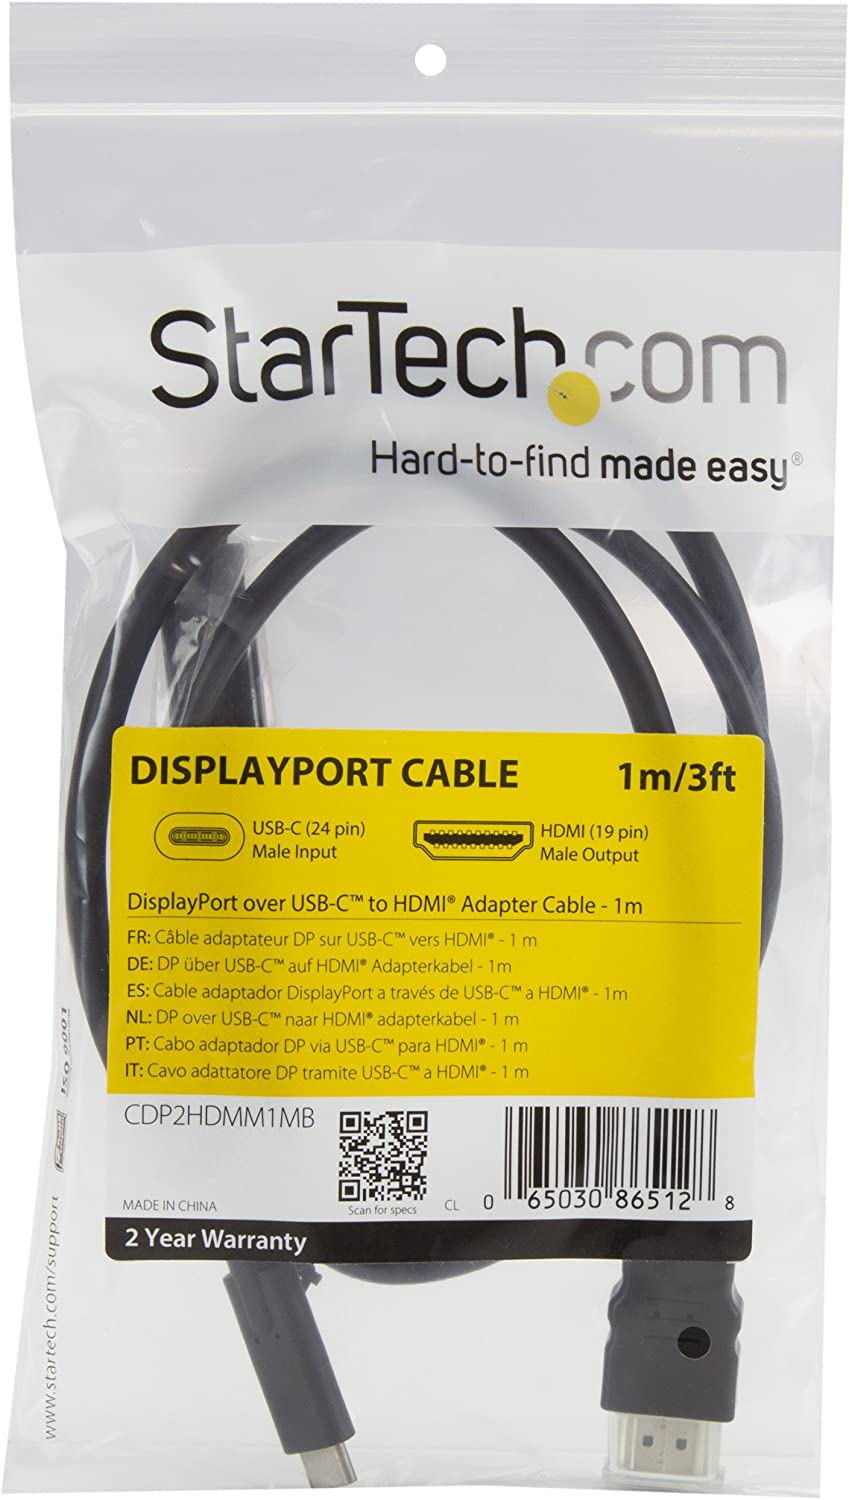 StarTech.com USB C to HDMI Cable - 3 ft / 1m - USB-C to HDMI 4K 30Hz - USB Type C to HDMI - Computer Monitor Cable (CDP2HDMM1MB) White White 3 ft / 1m